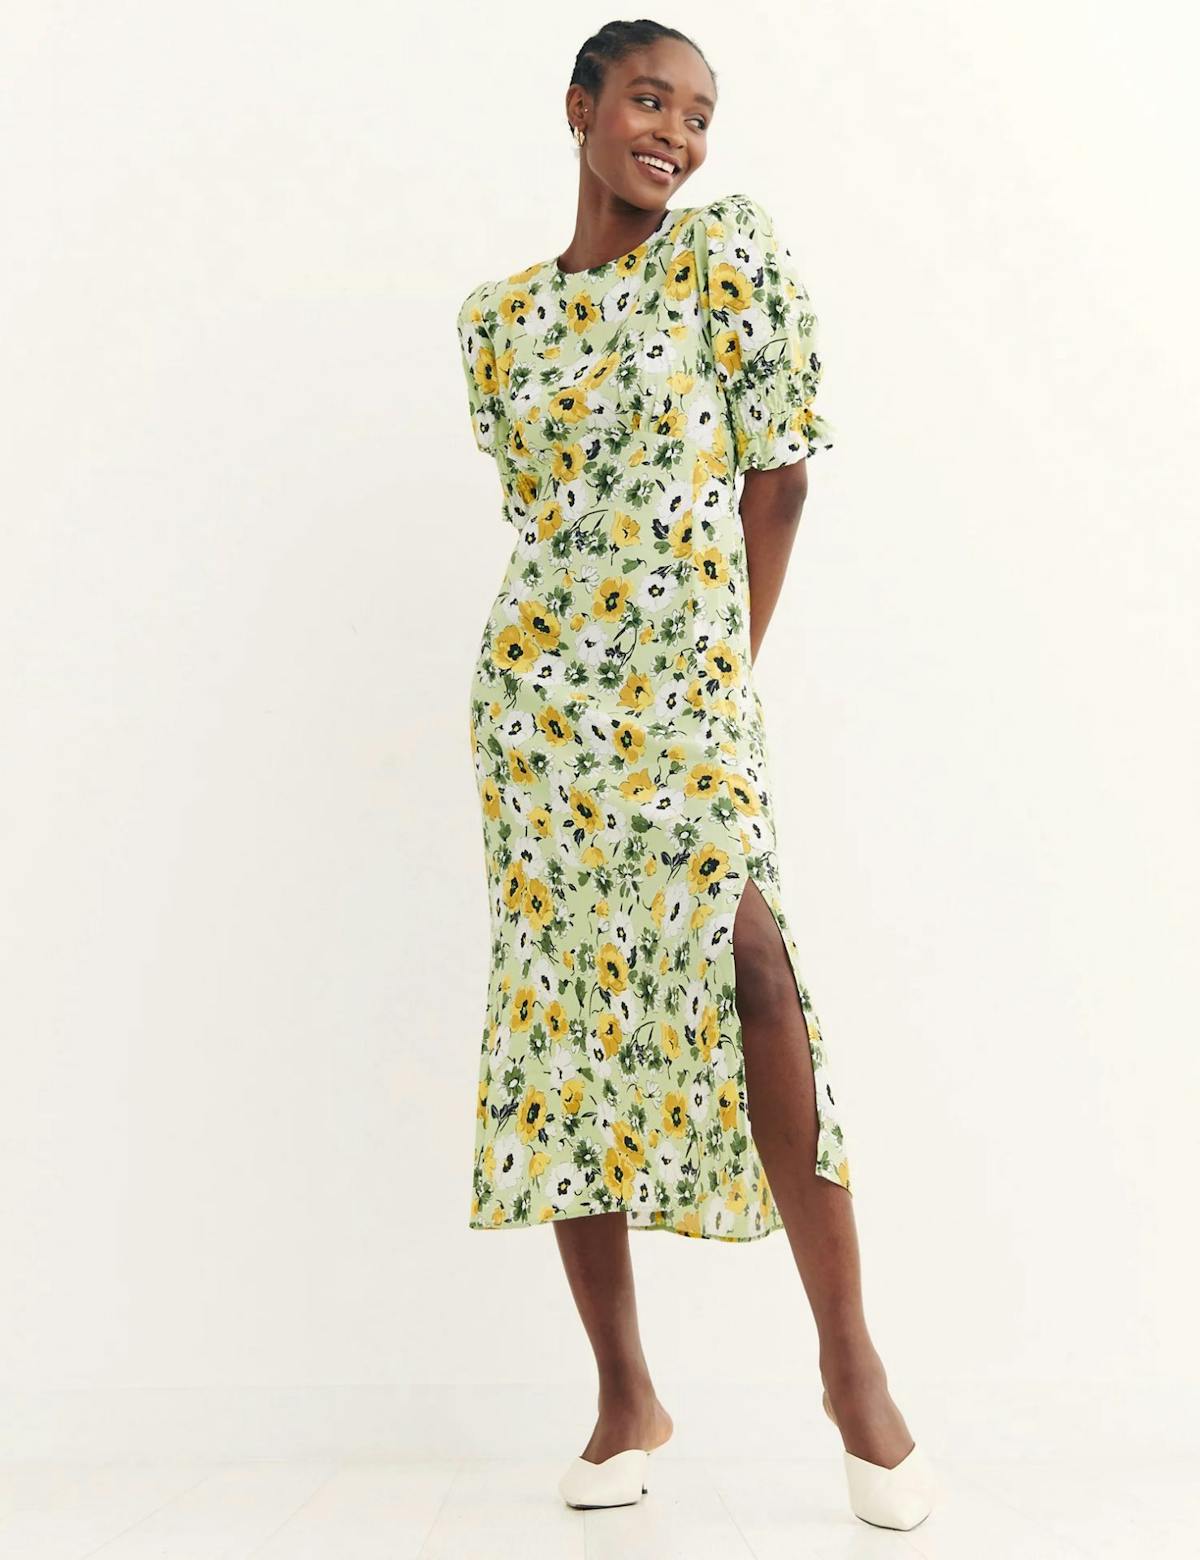 Best M&S dresses: 14 new pieces to buy now